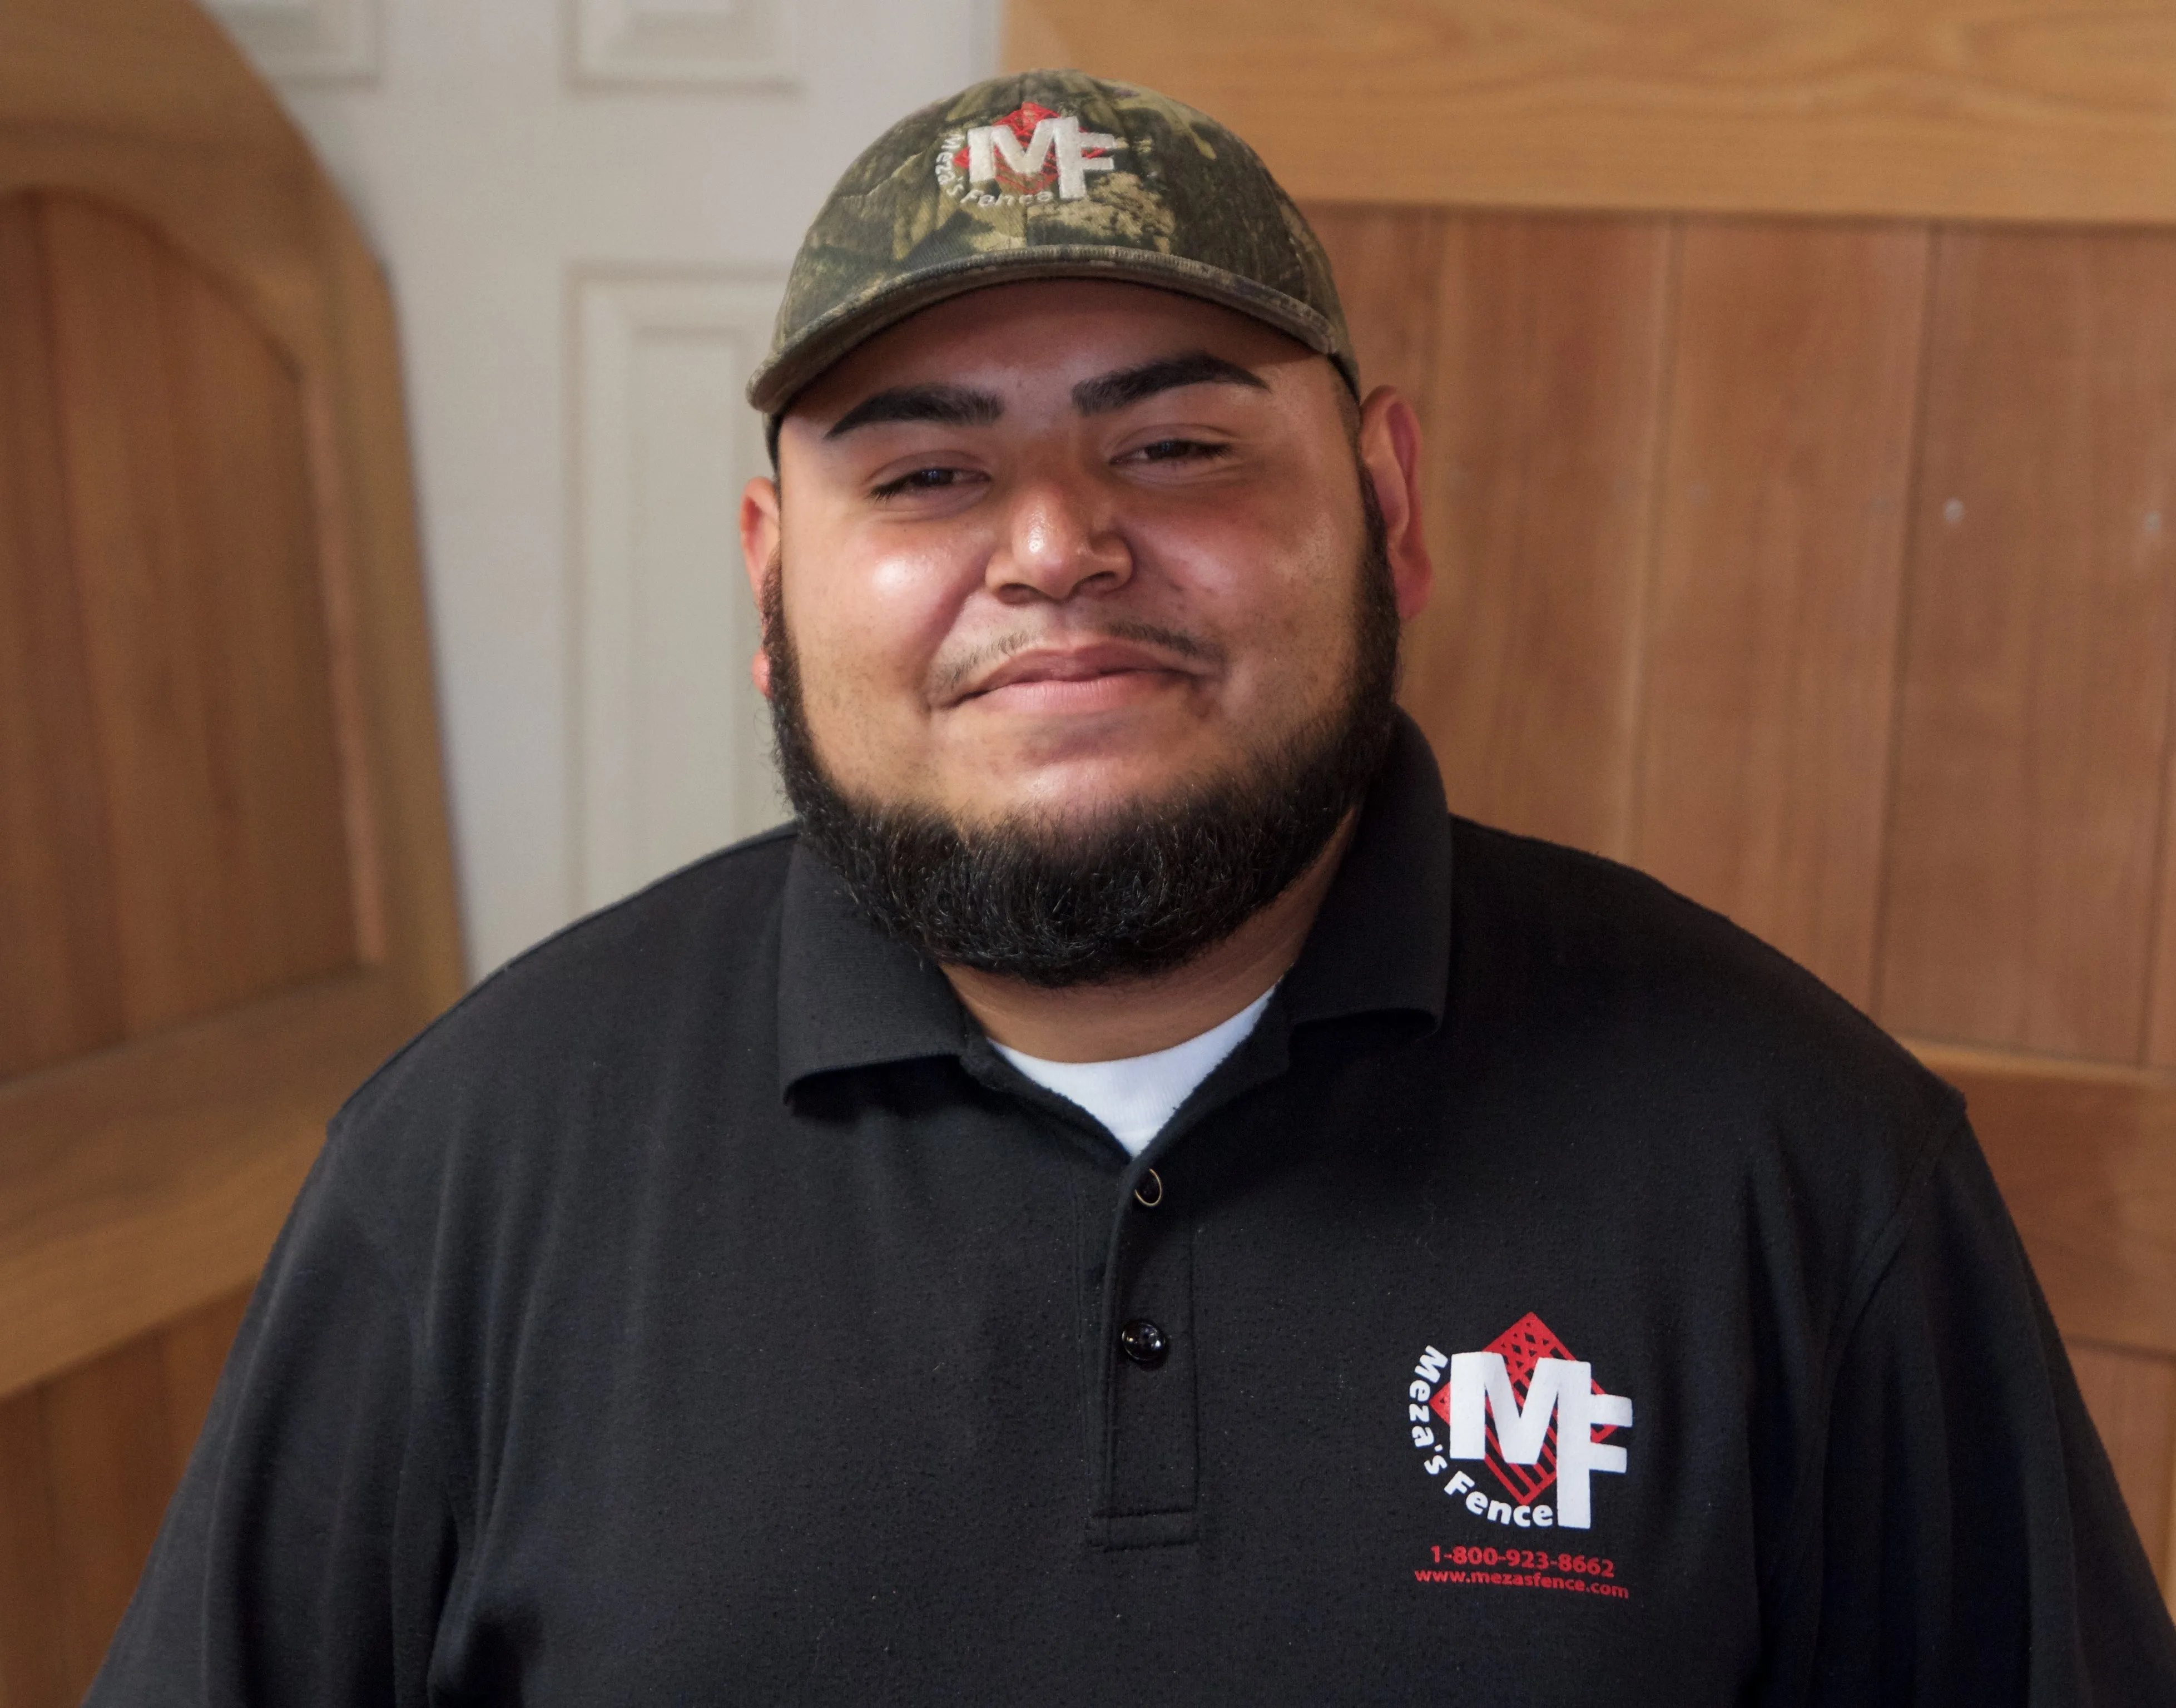 Julian Meza is project manager of Meza’s Fence, a Diamond Certified company. He can be reached at (408) 692-5976 or by email.